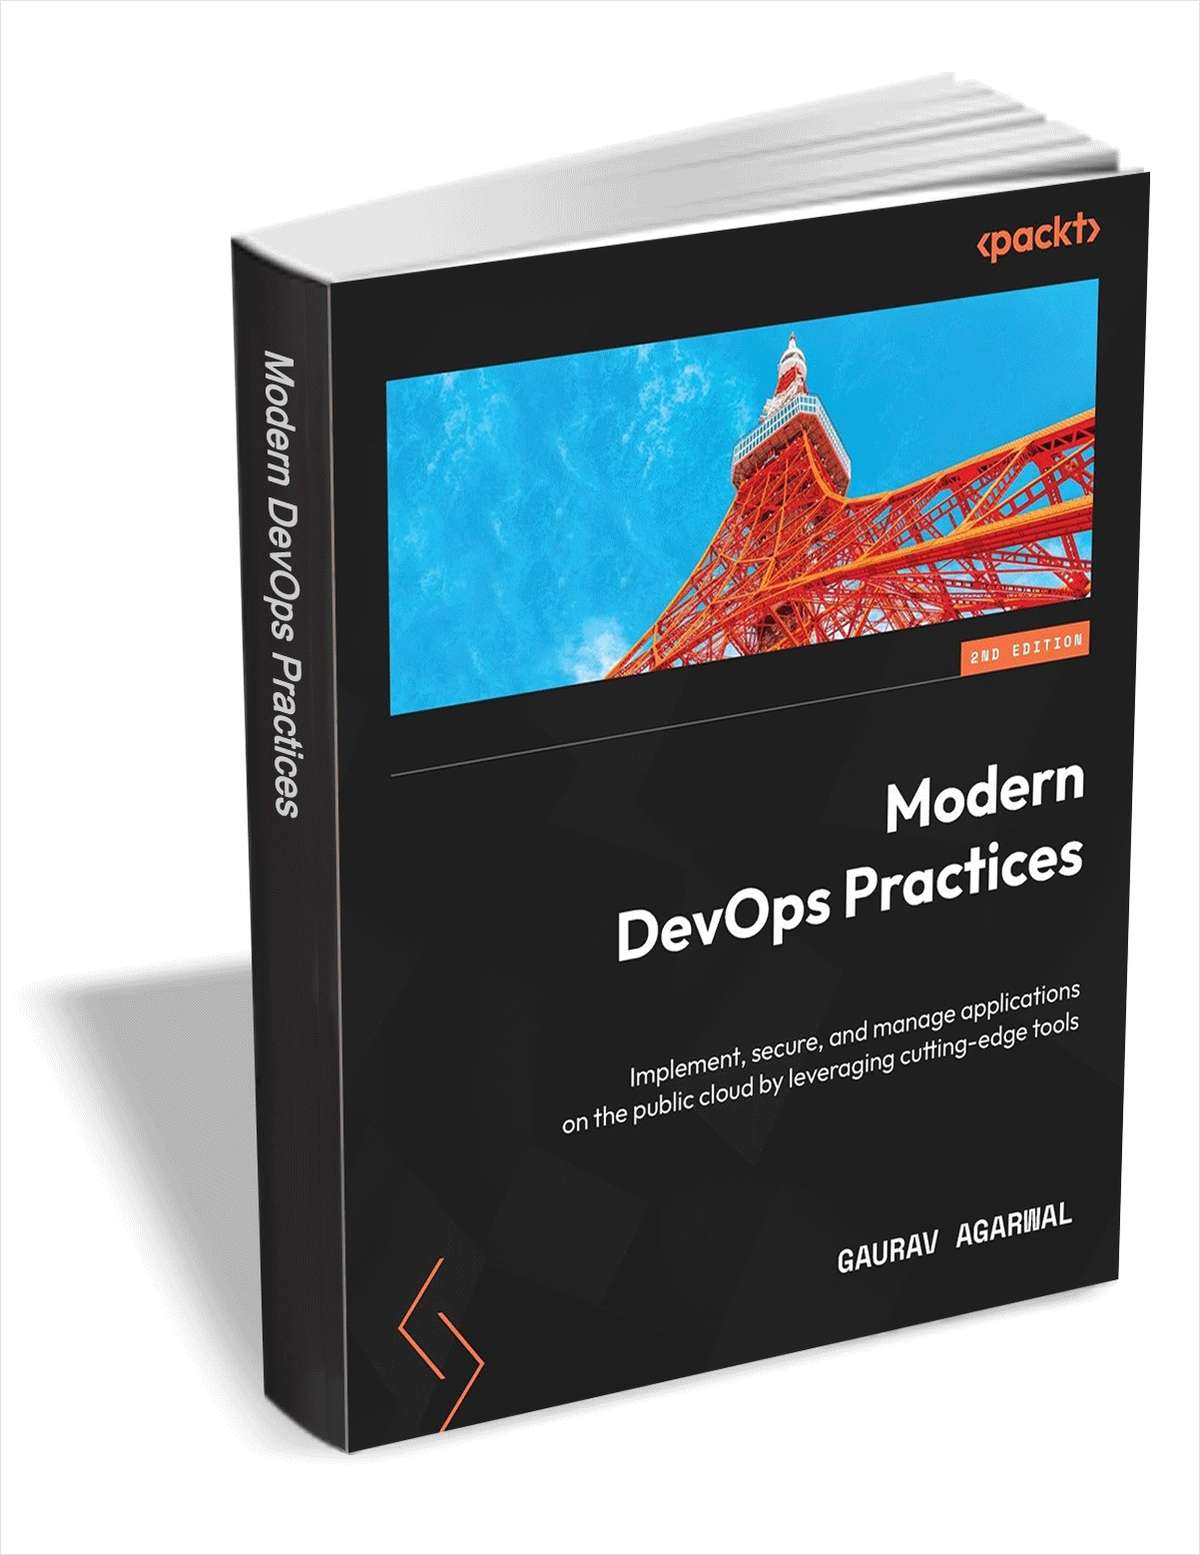 Modern DevOps Practices - Second Edition ($39.99 Value) FREE for a Limited Time